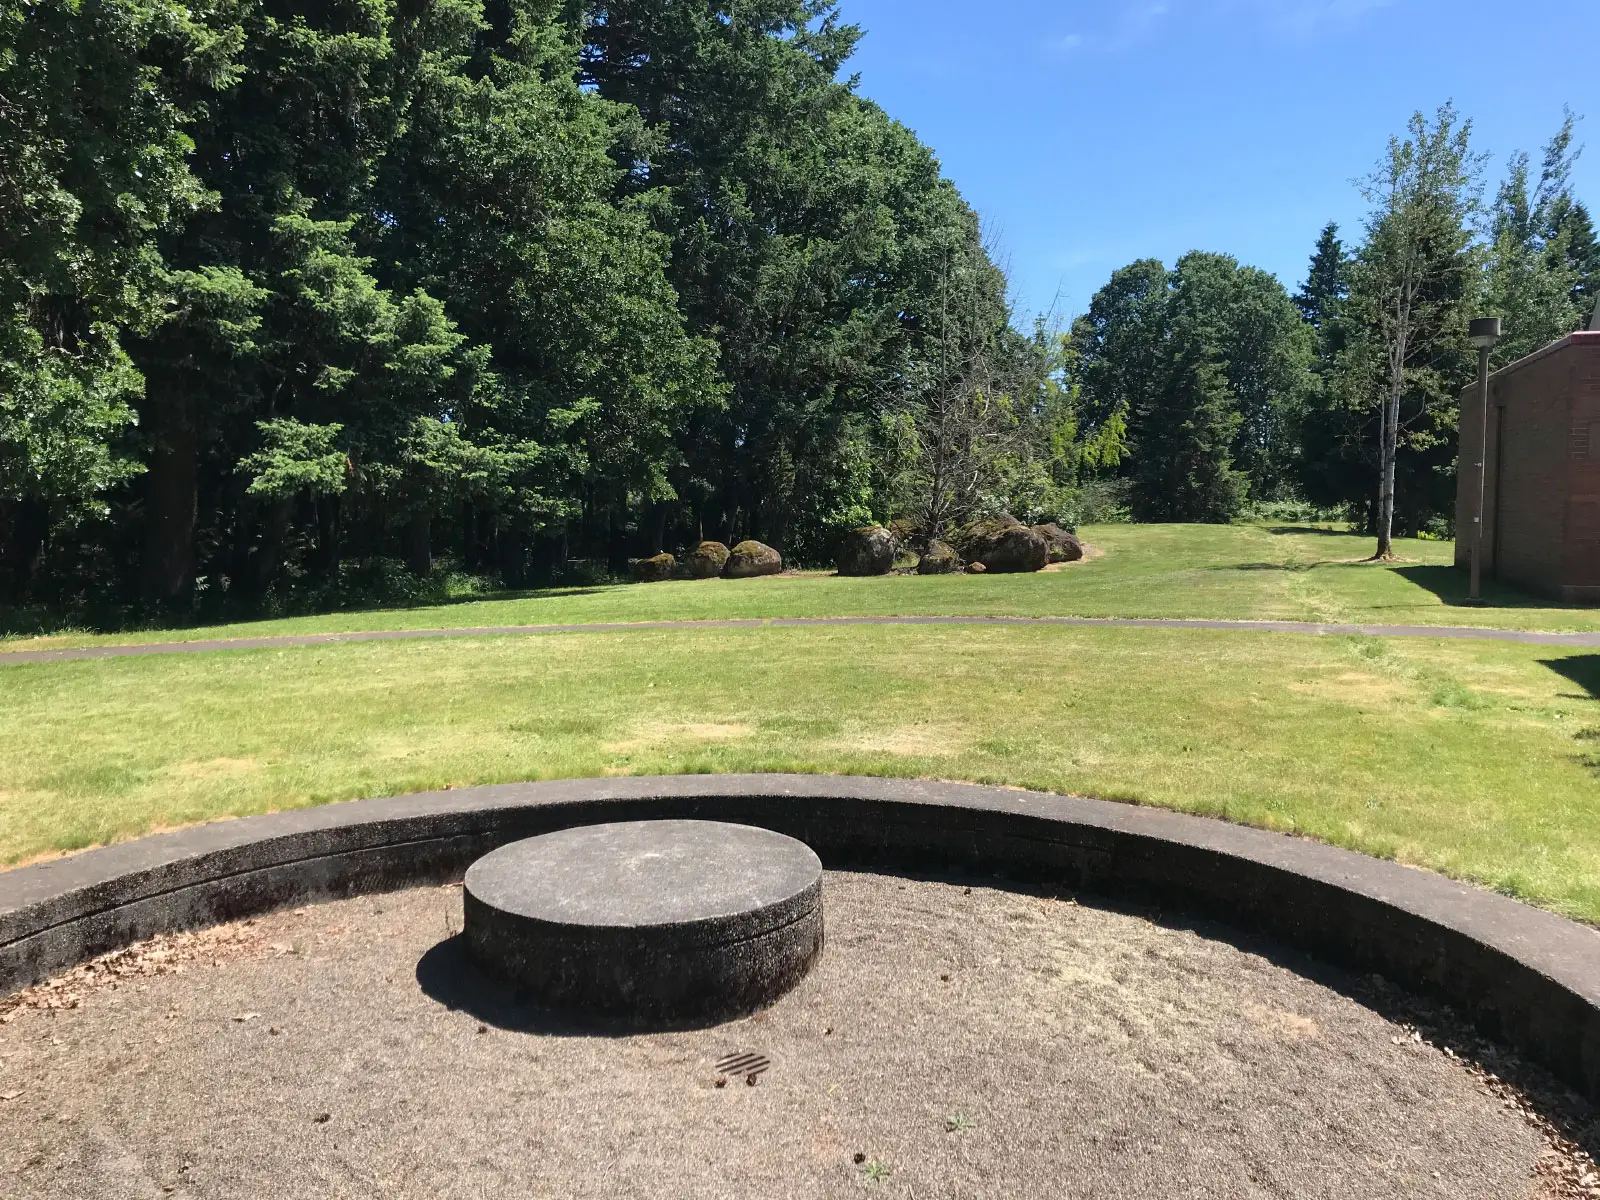 A circular, stone structure pit with sand in an open field on the Oregon City campus